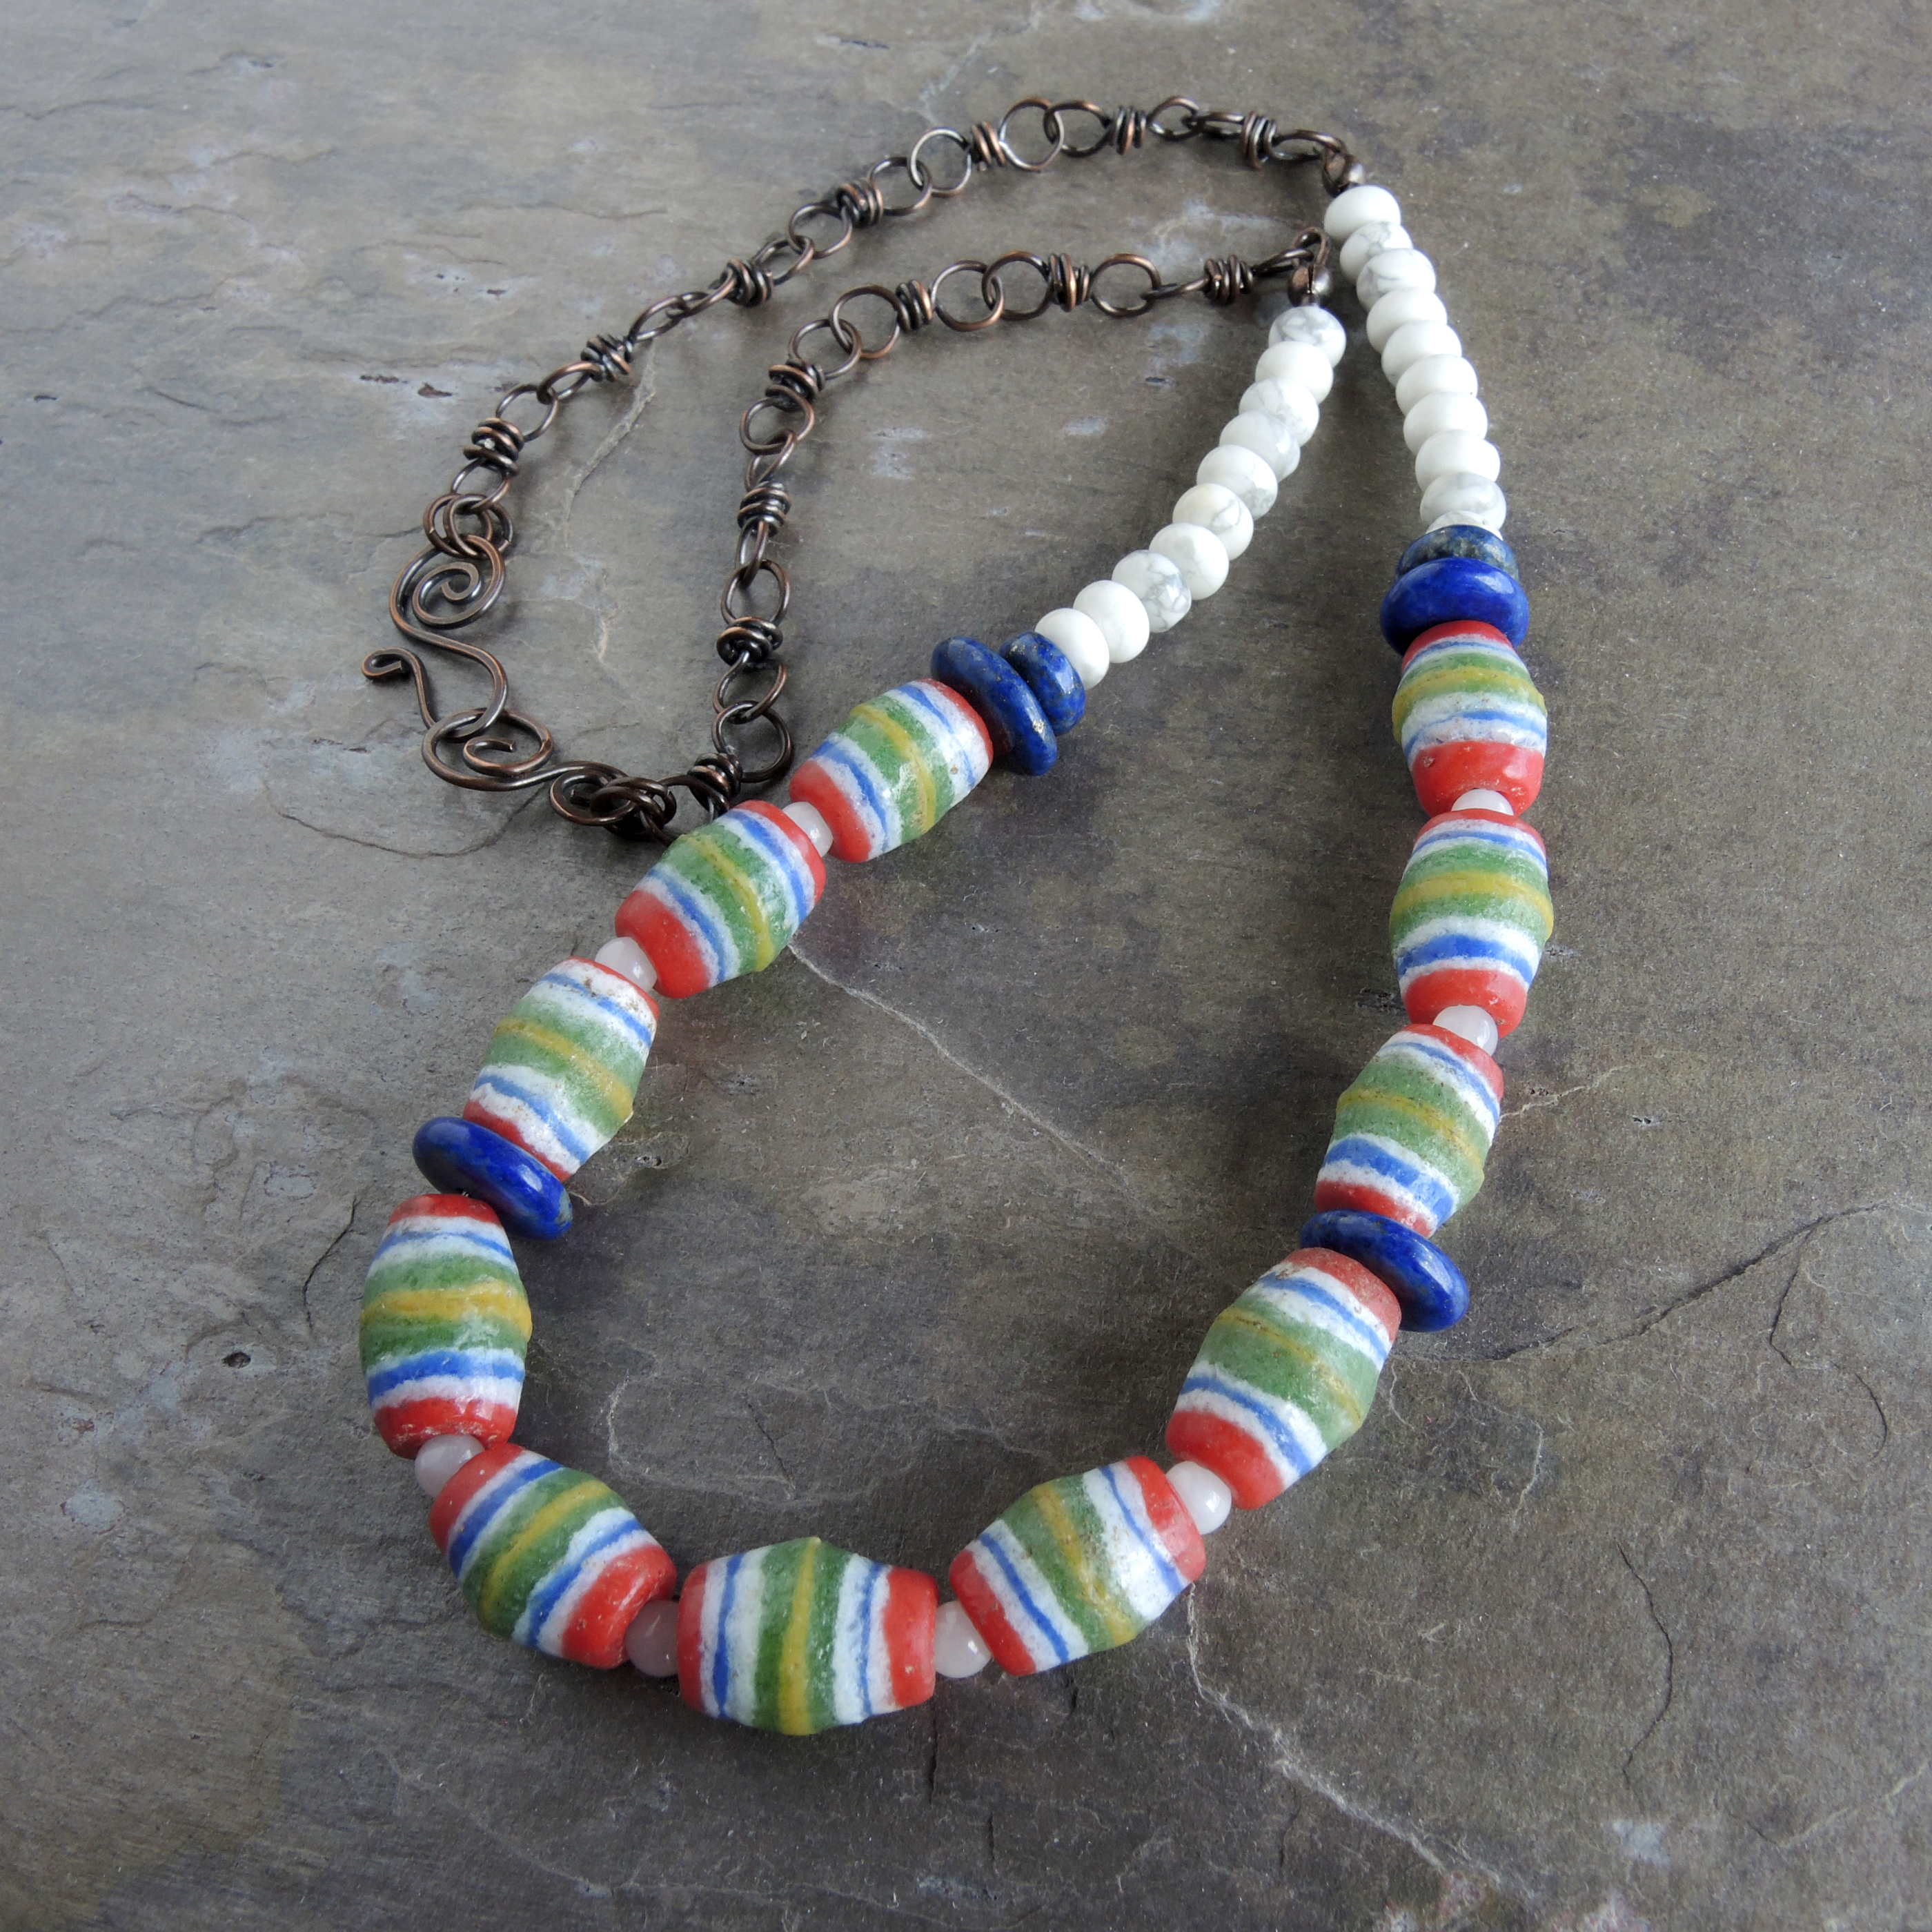 ON SALE African Beaded Colorful Necklace, Zulu Necklace, Beaded Necklace, African  Jewelry, Masai Necklace, Women Necklace, Wedding Gift - Etsy | African beads,  African jewelry, African beaded bracelets